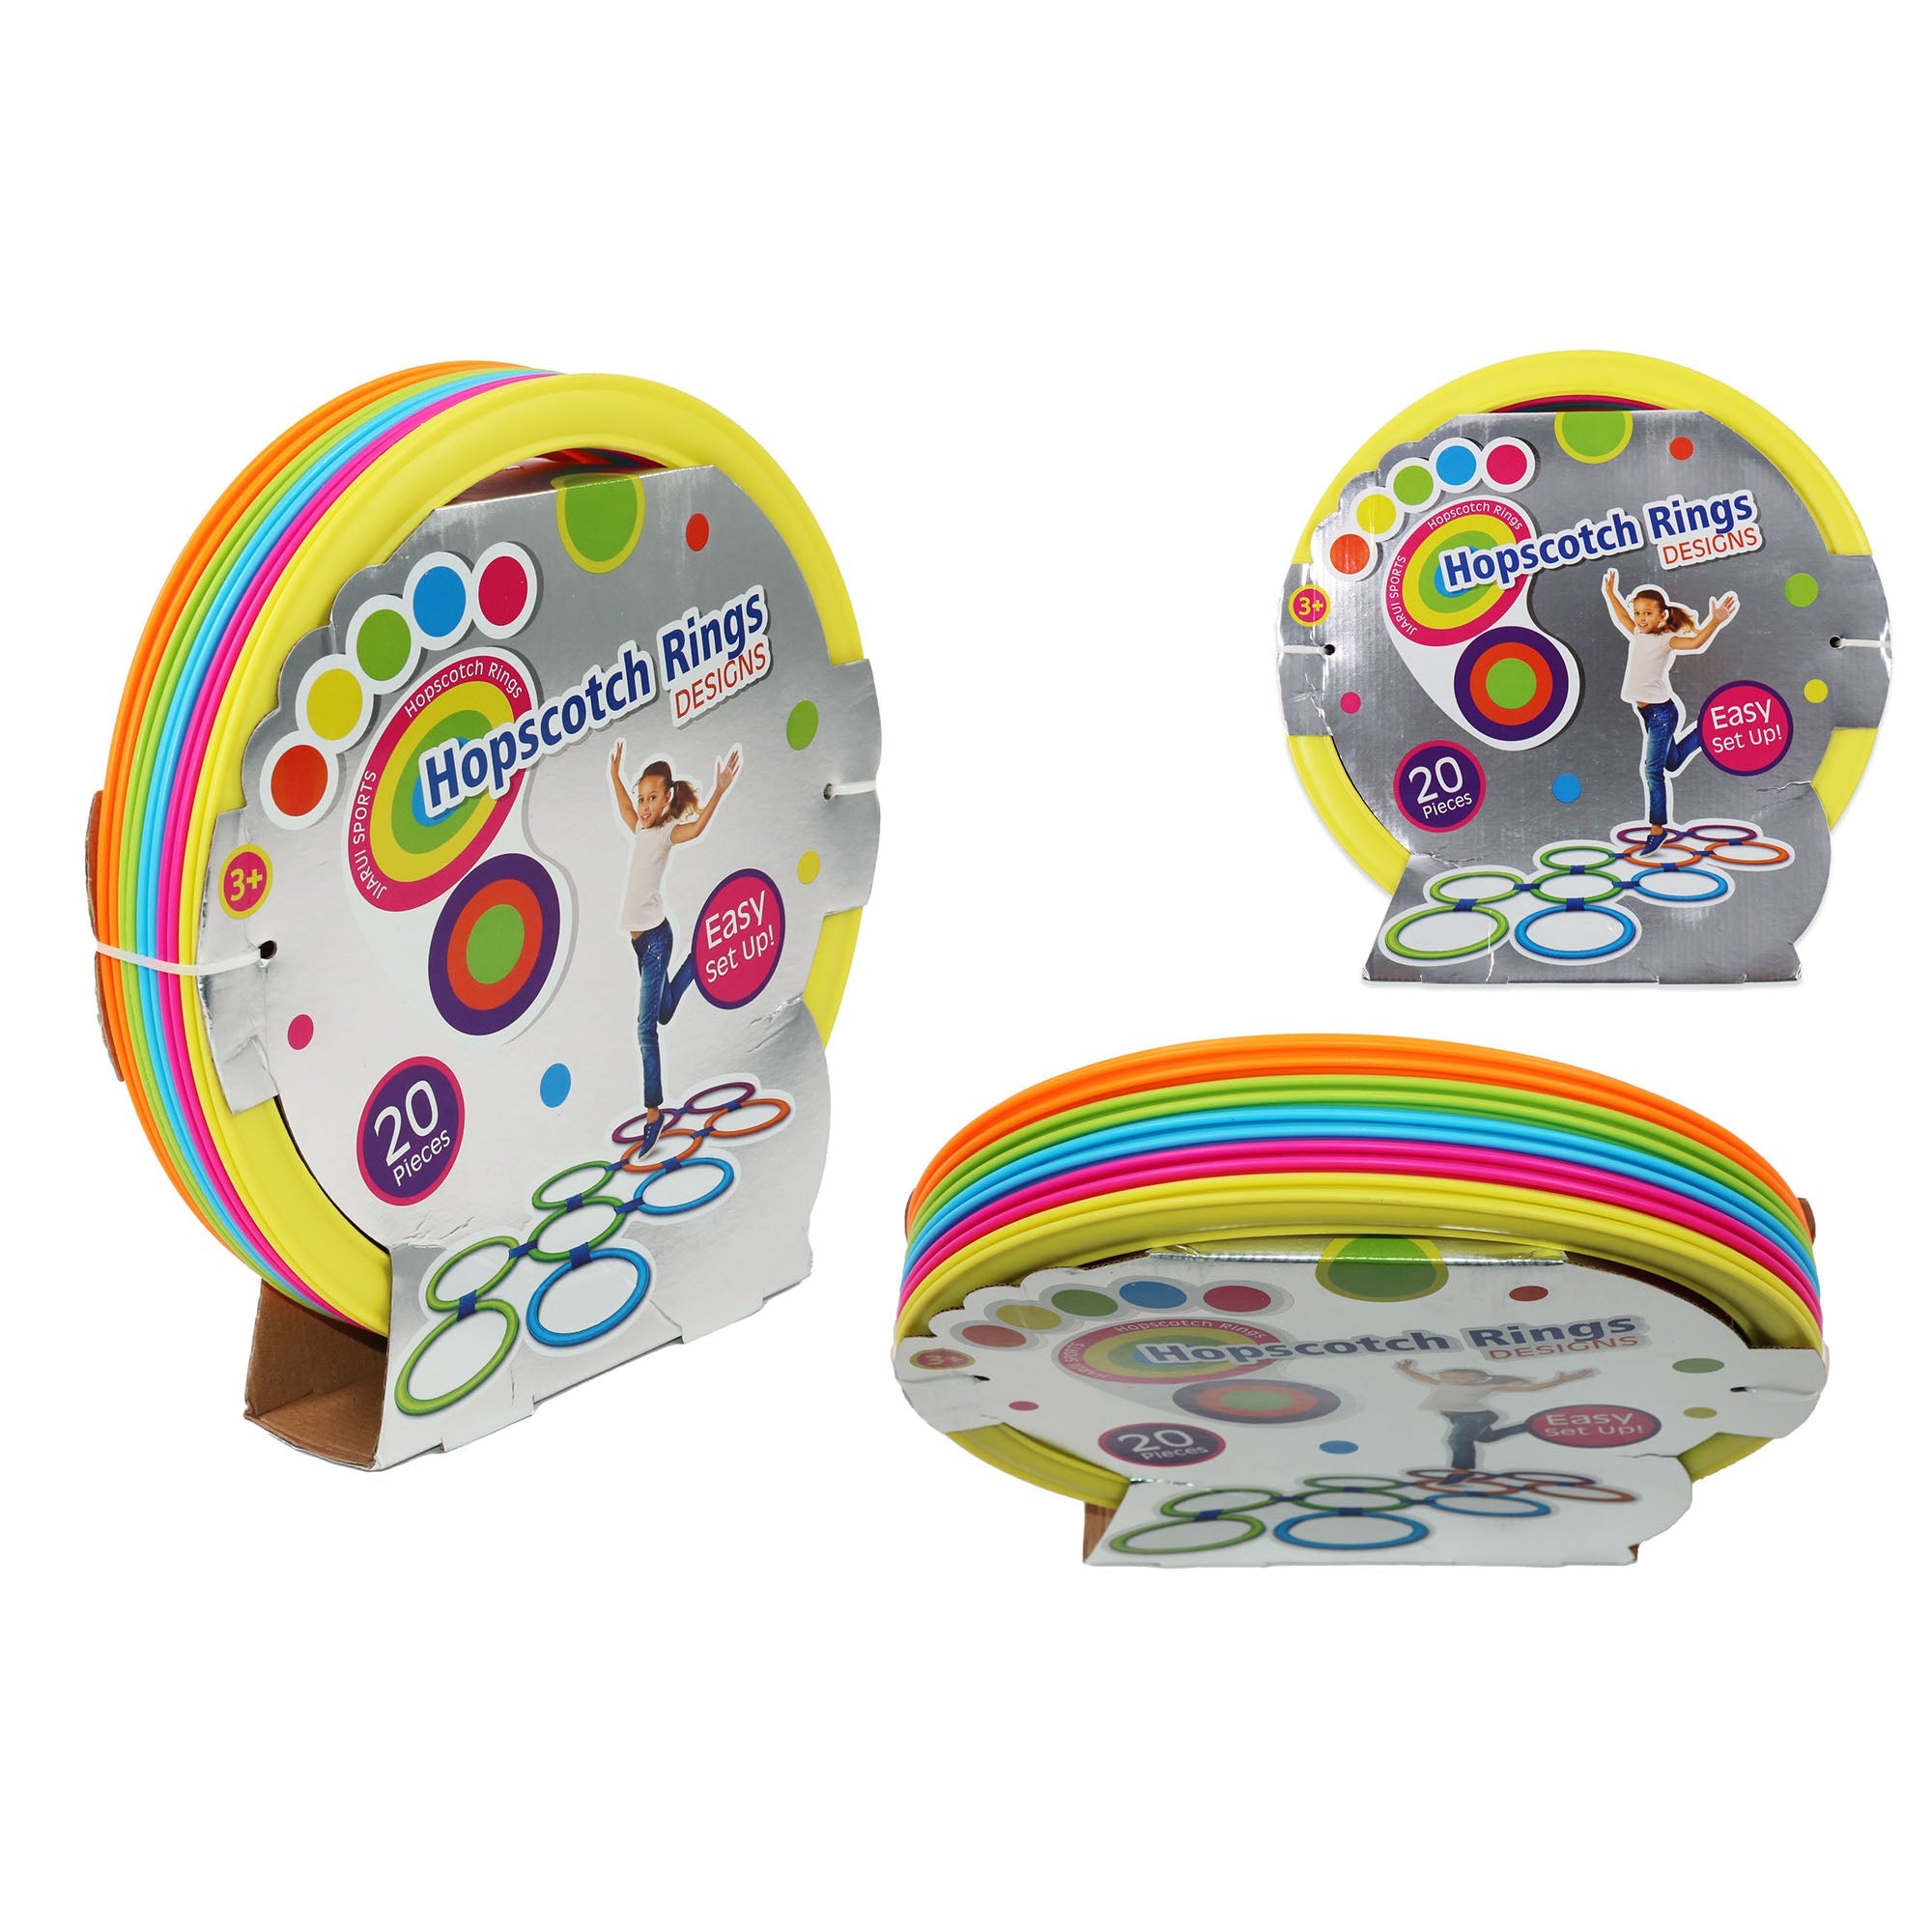 10 Hopscotch Plastic Rings Multicolored 10.5in each